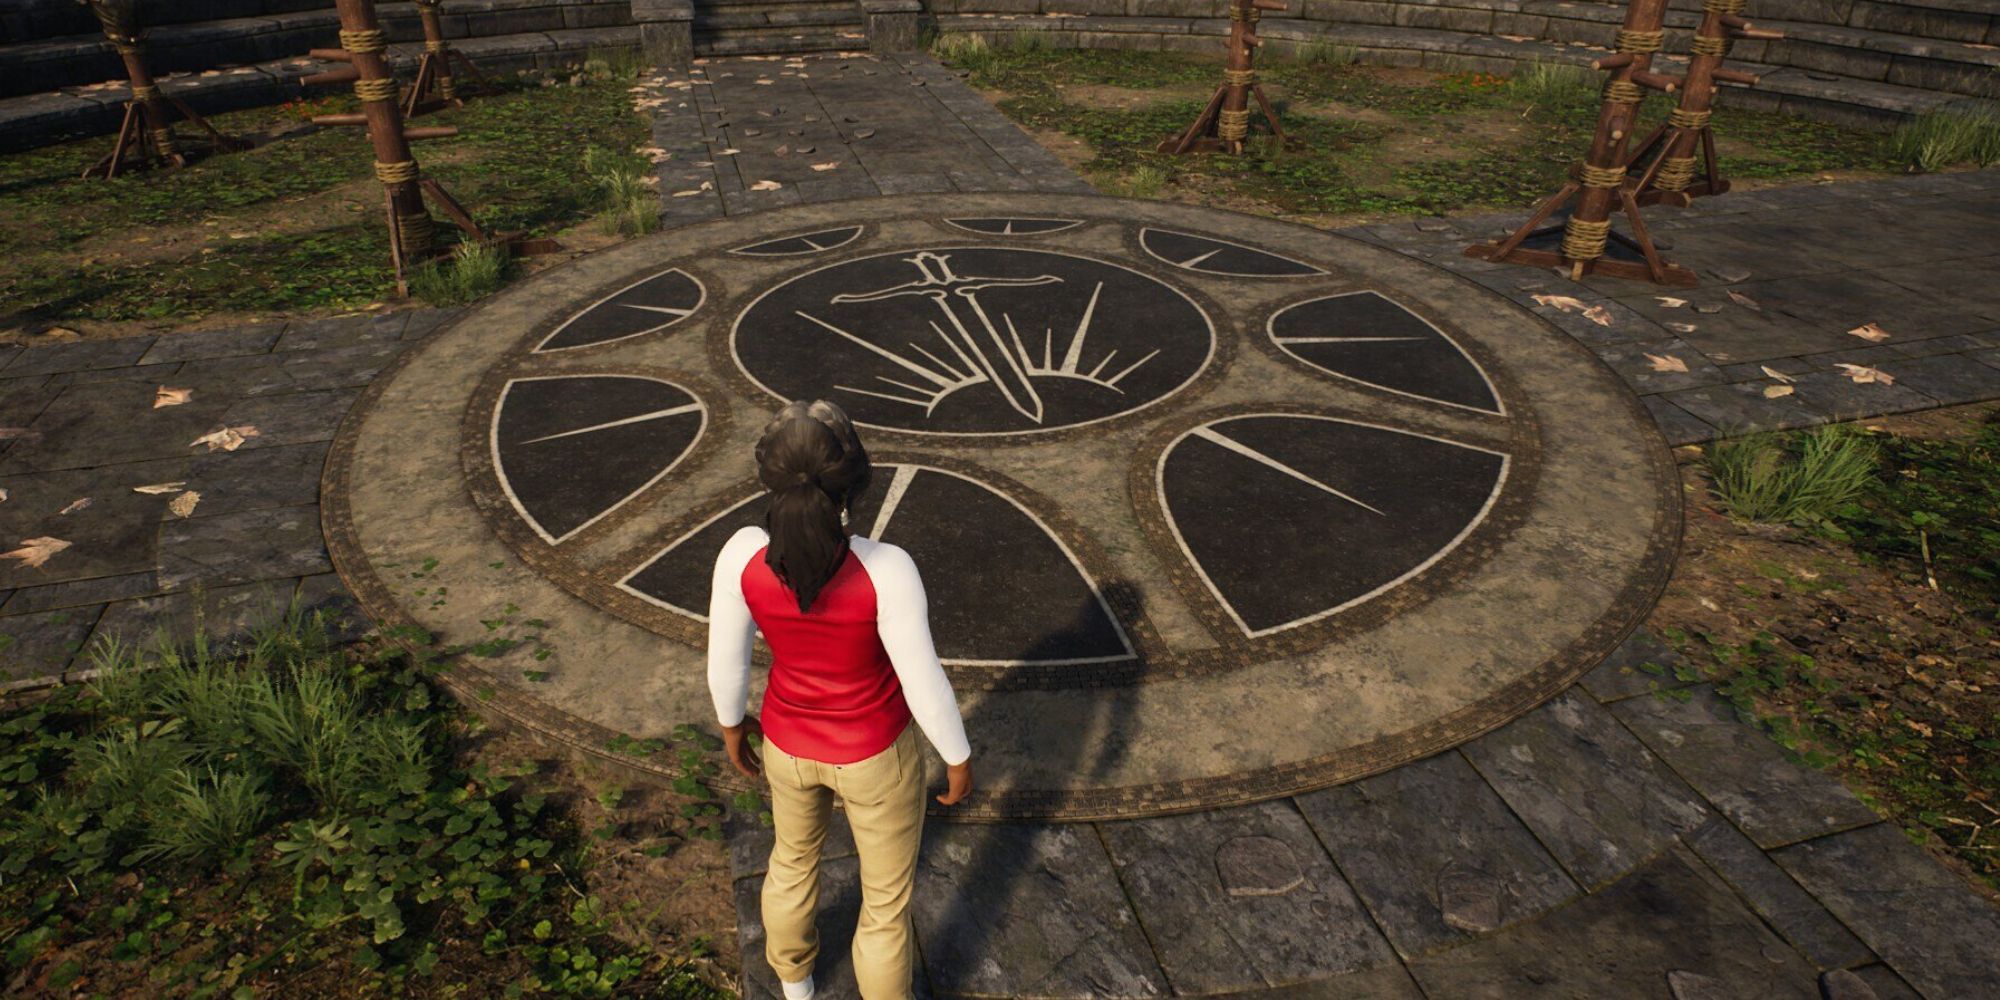 Hunter standing next to a shield painting on the floor of The Yard. There is a sword at the centre of the shield.